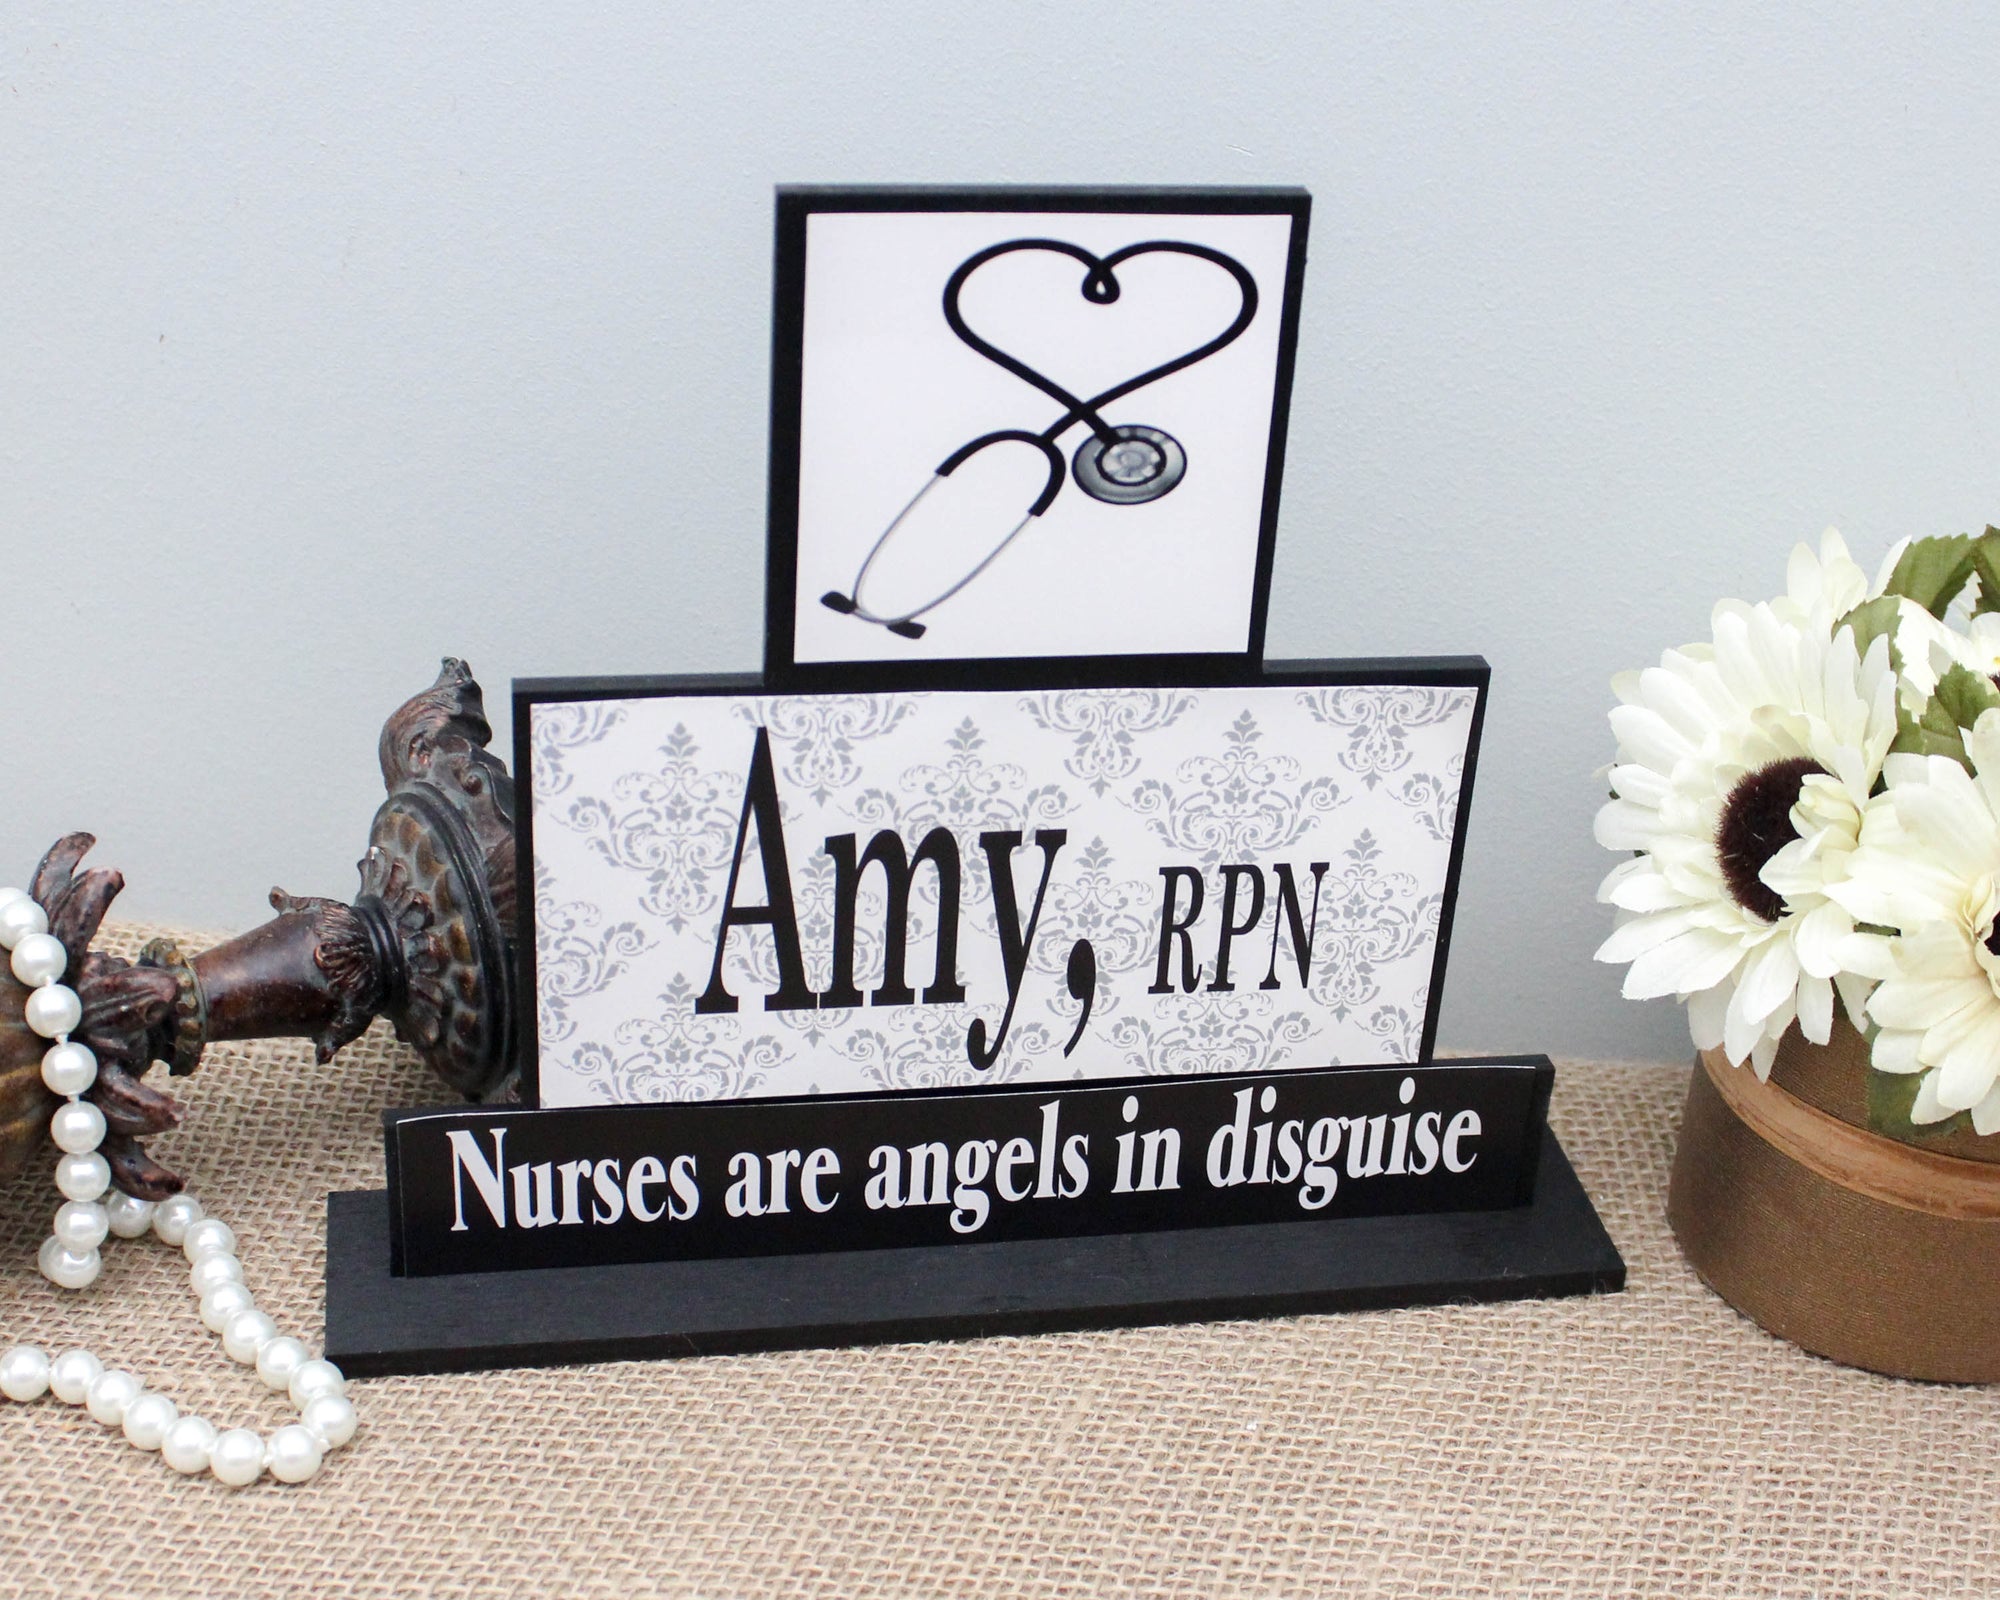 Nurses are angels in disguise wood sign